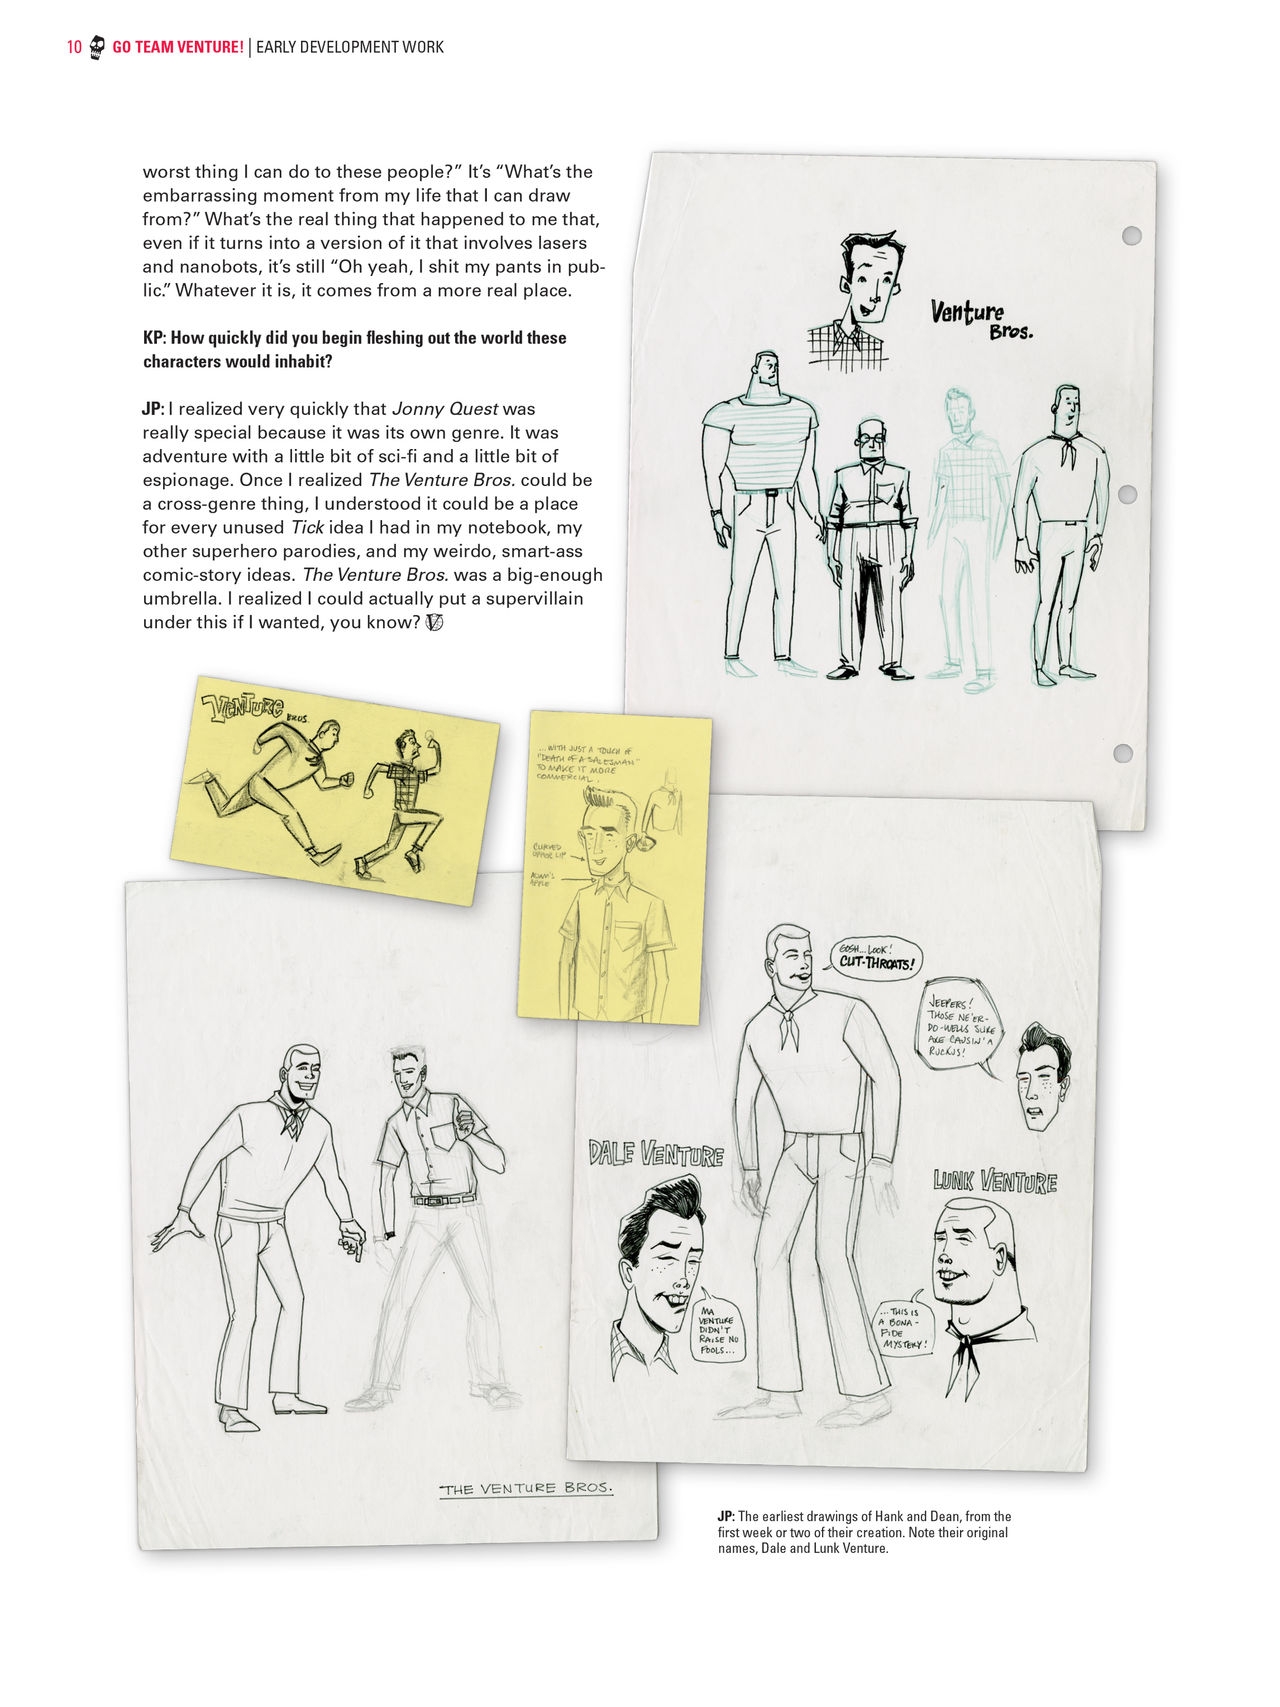 Go Team Venture! - The Art and Making of the Venture Bros 9